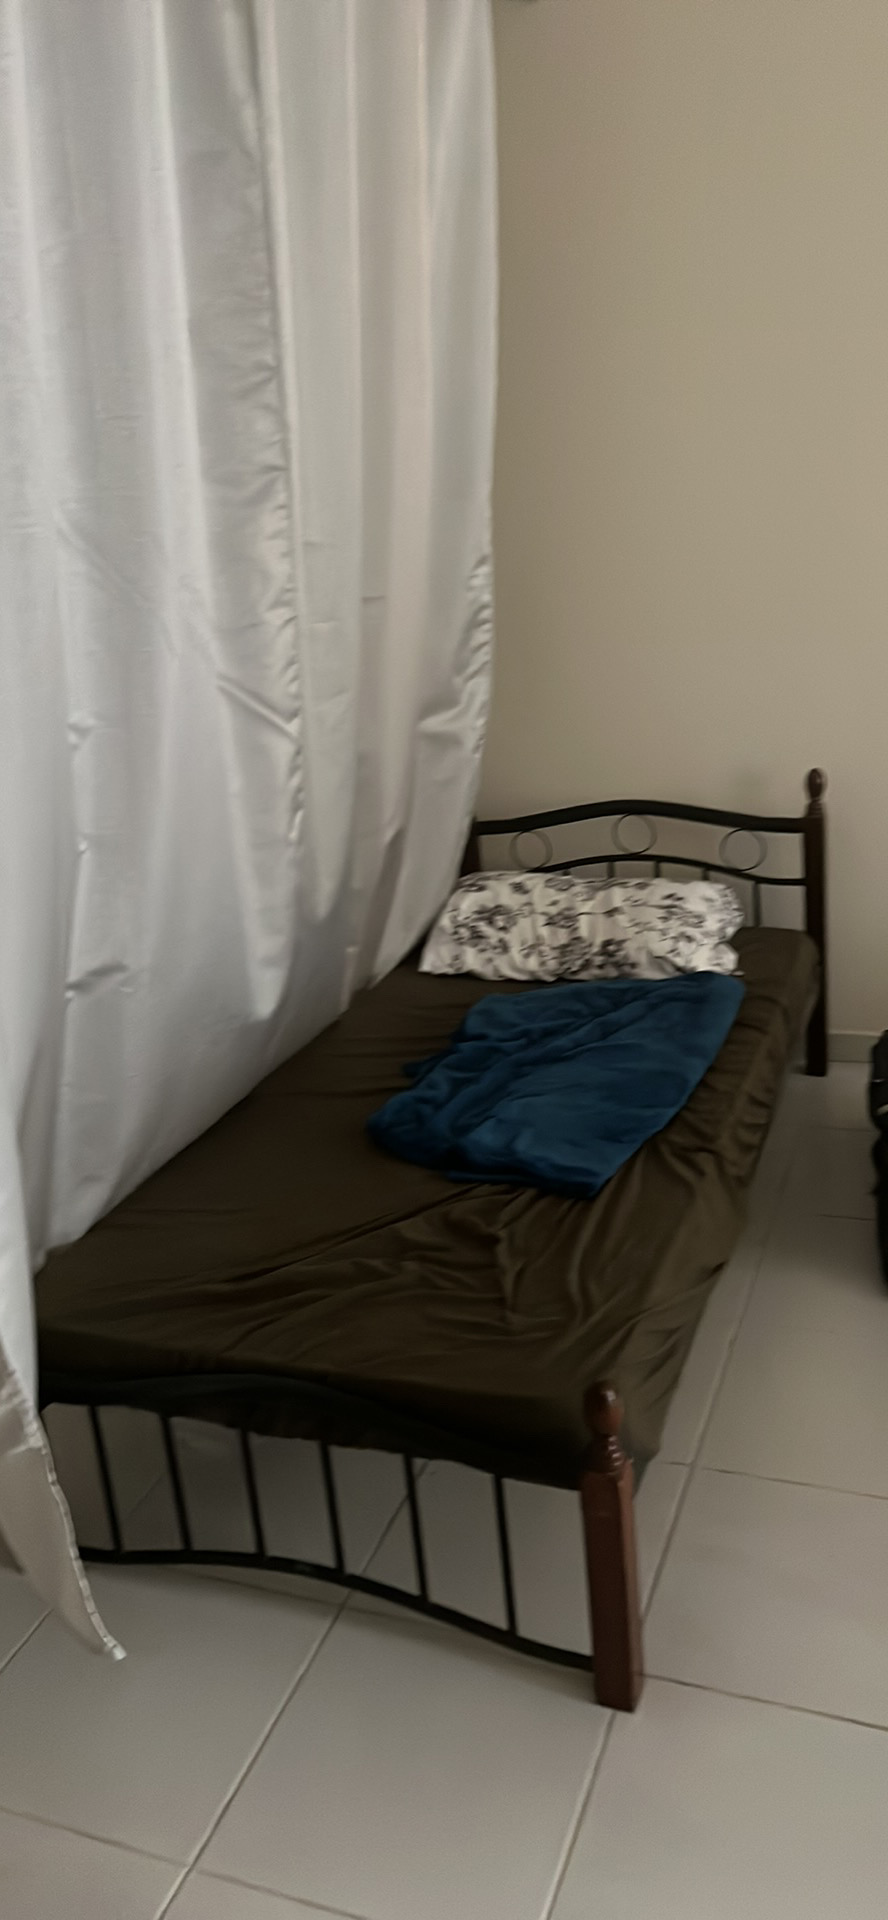 Executive Bachelor Bedspace for rent